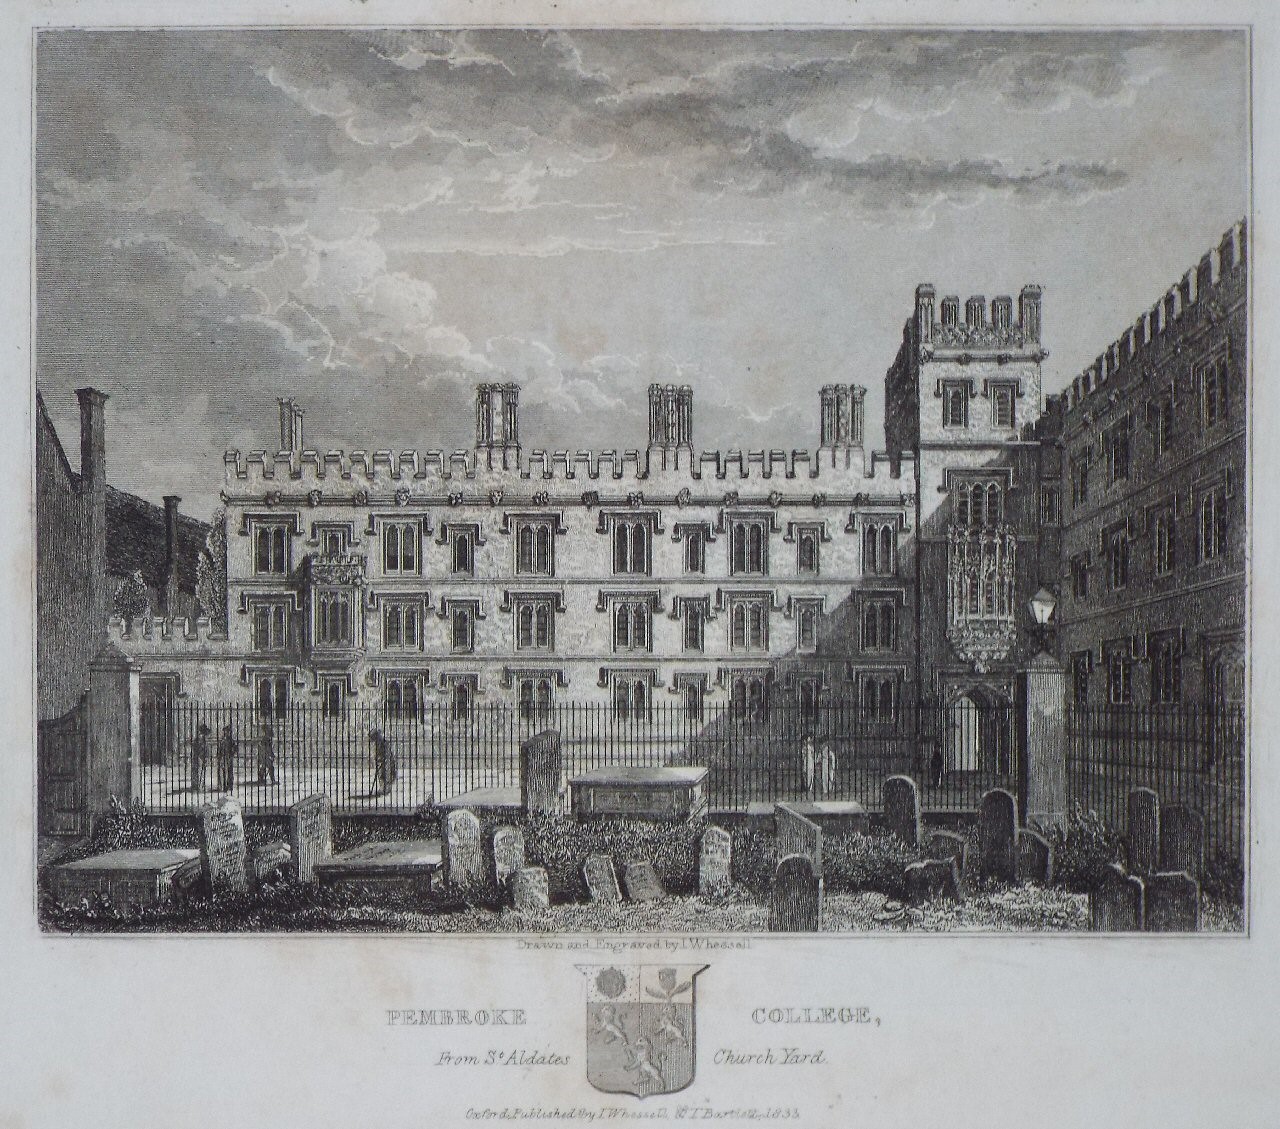 Print - Pembroke College, from St. Aldates Church Yard - Whessell